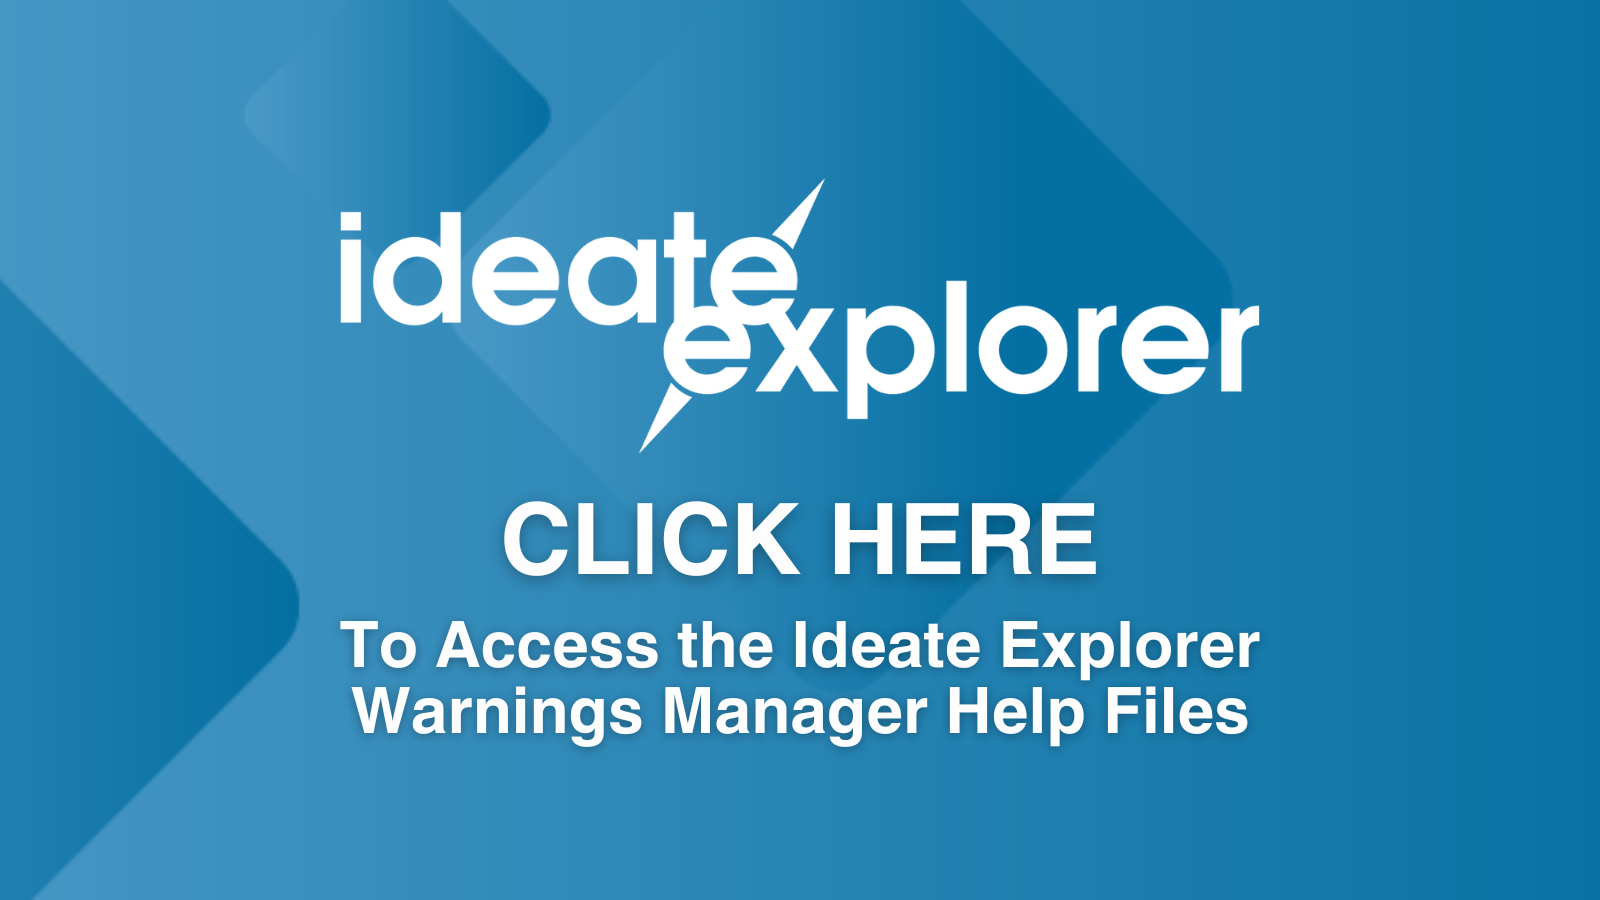 Introduction to Ideate Explorer Warnings Manager